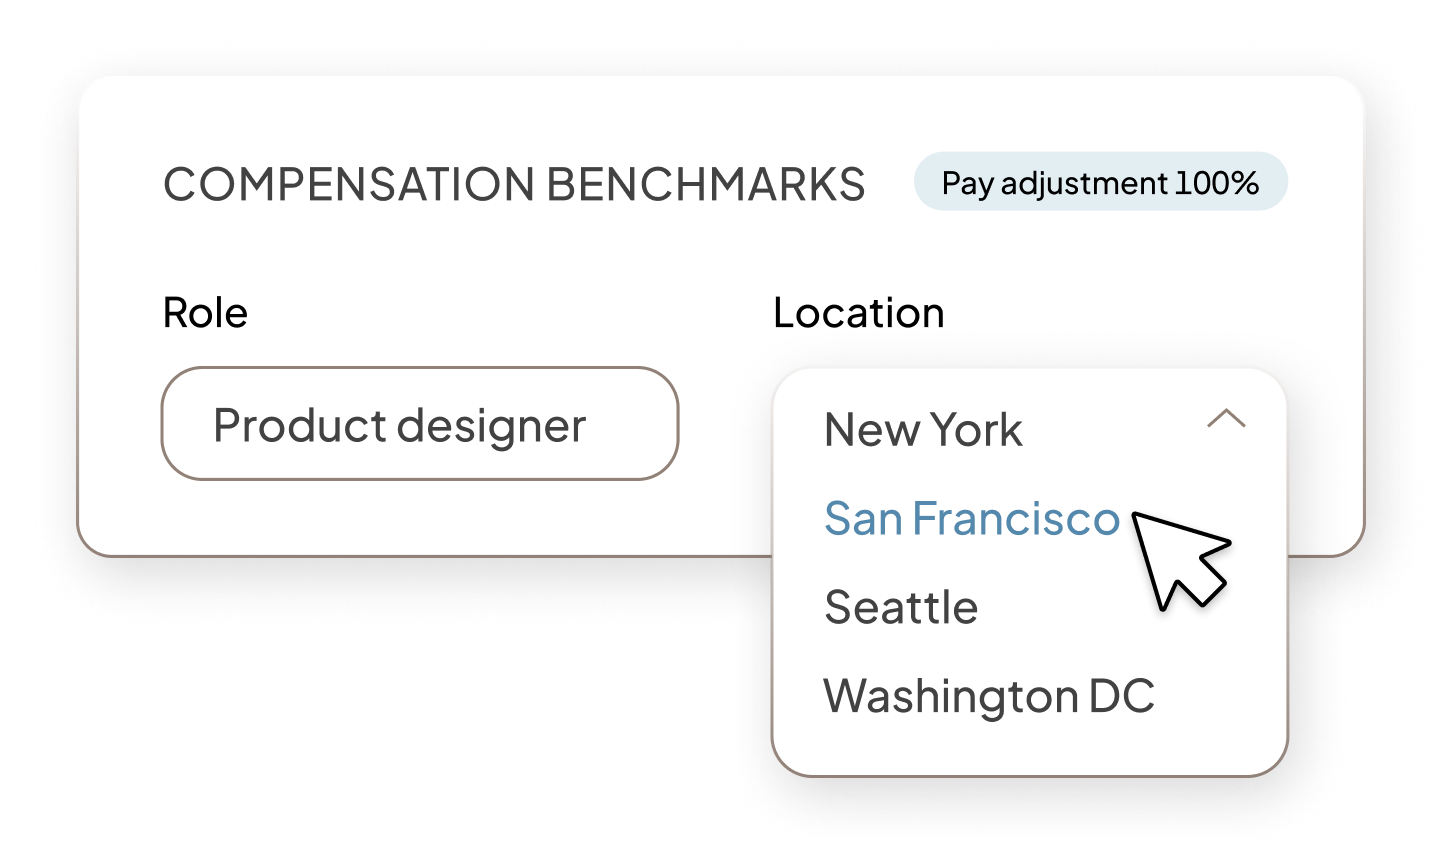 UI Image of compensation benchmarks showing options to filter by role and location